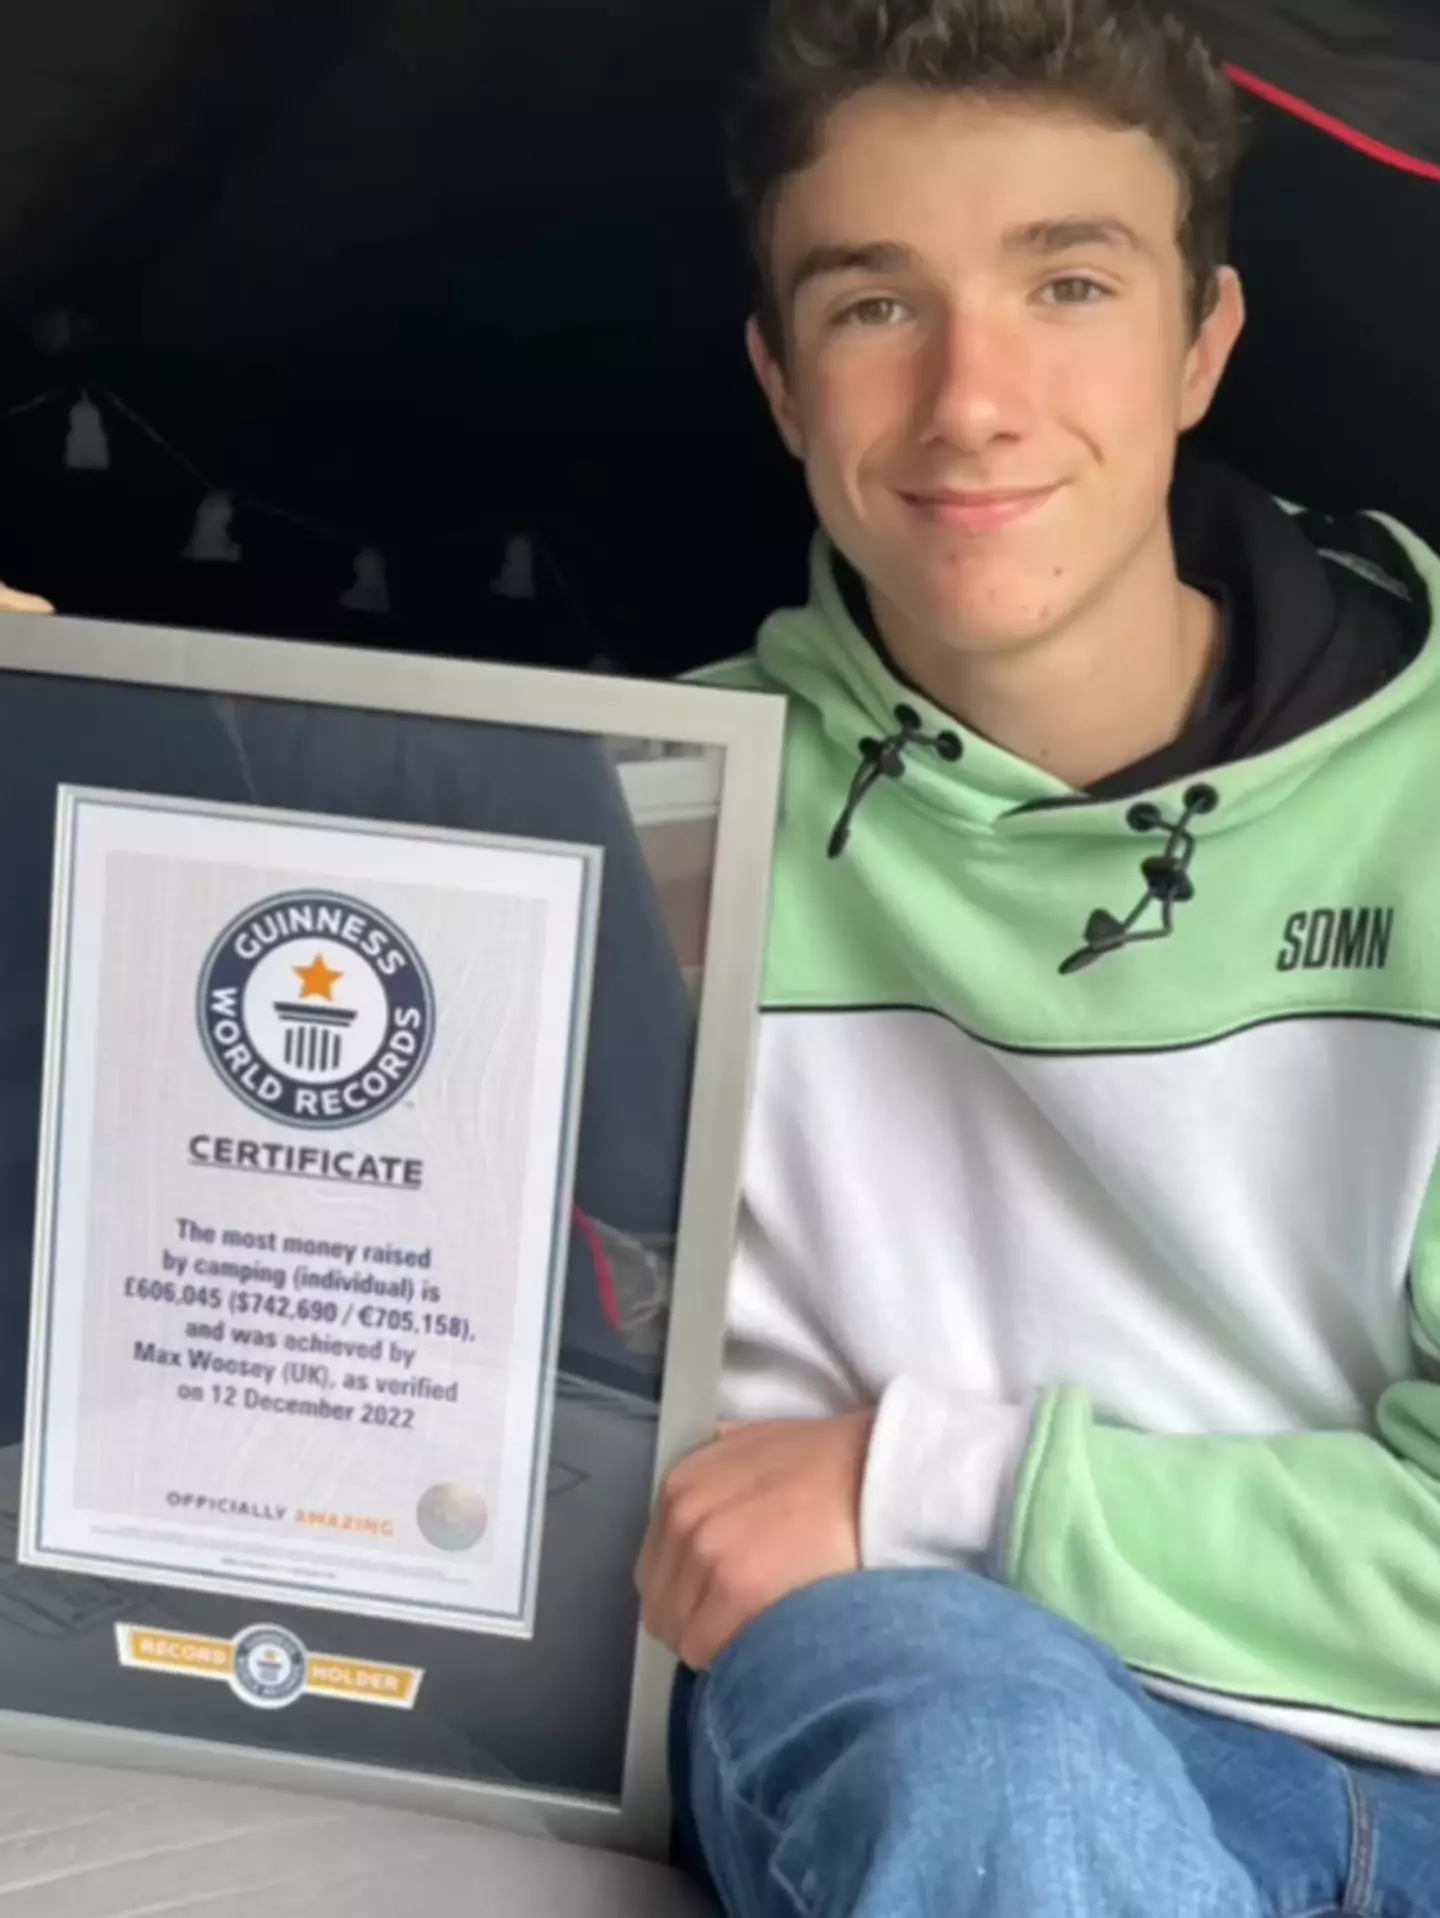 Max has broken a Guinness World Record for the most money raised by camping.